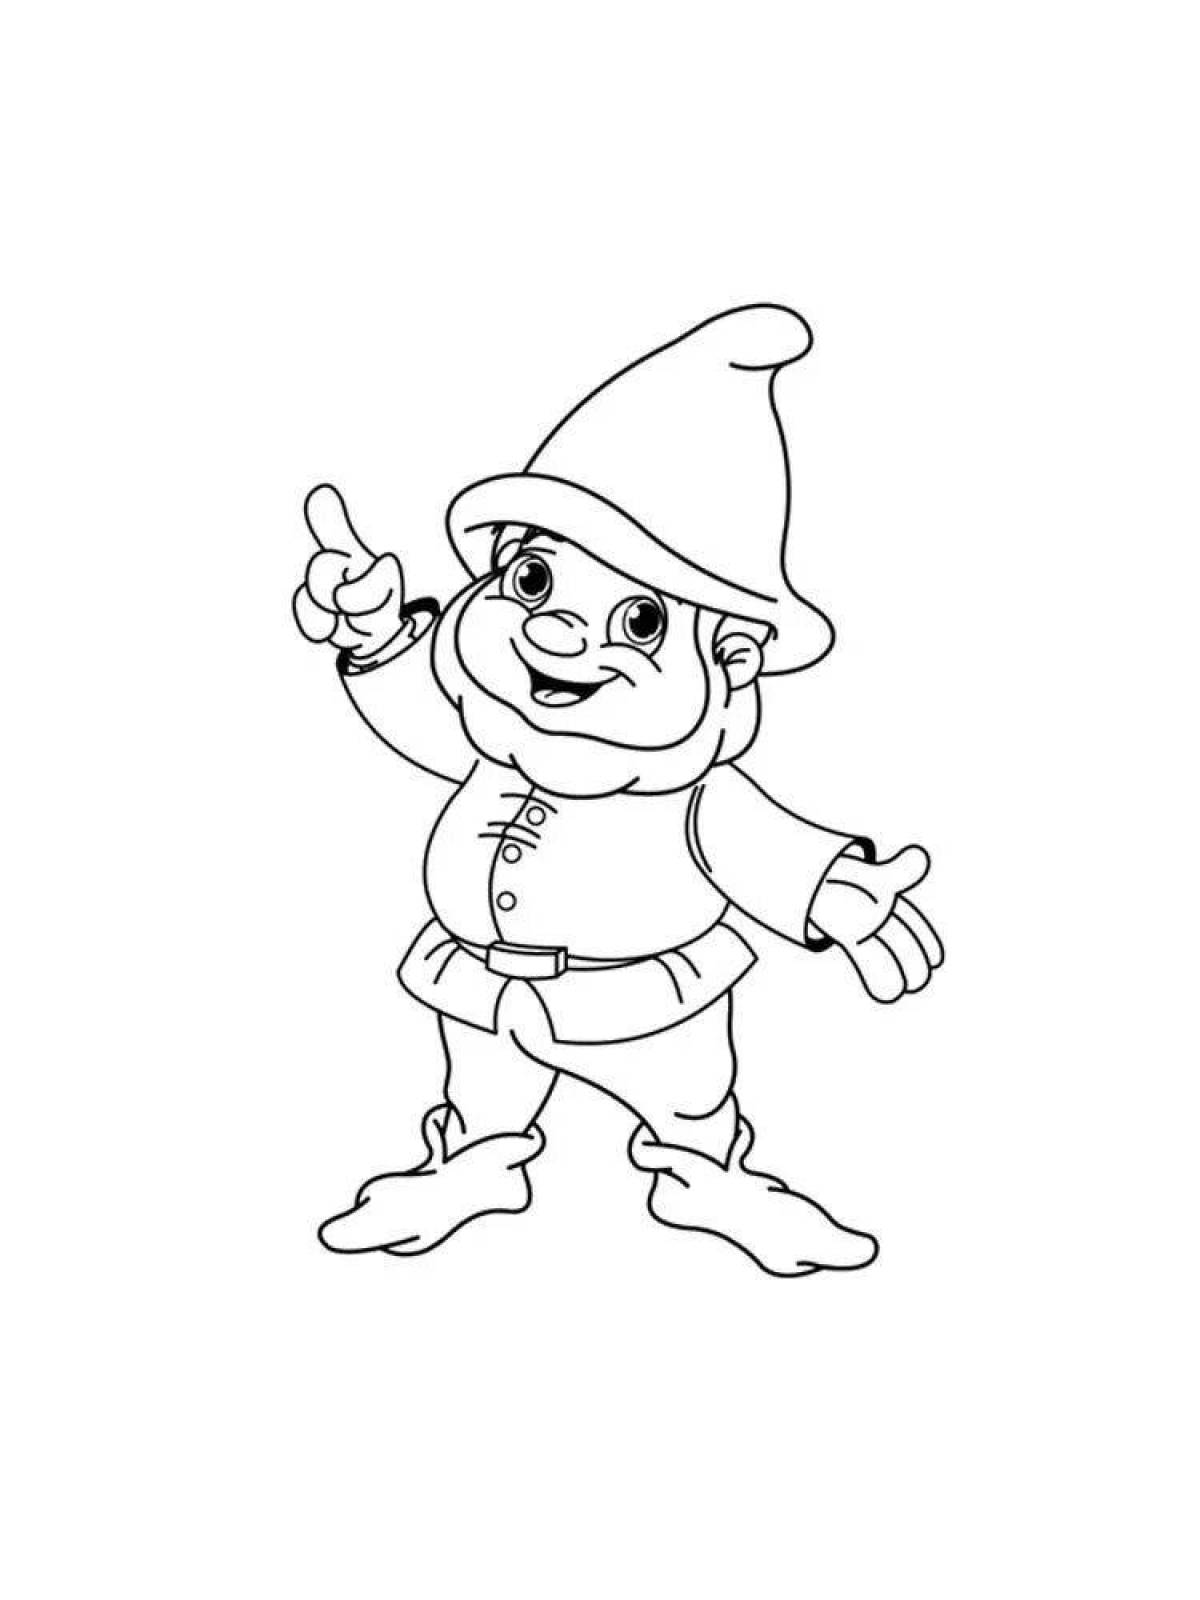 Fantastic gnome coloring book for kids